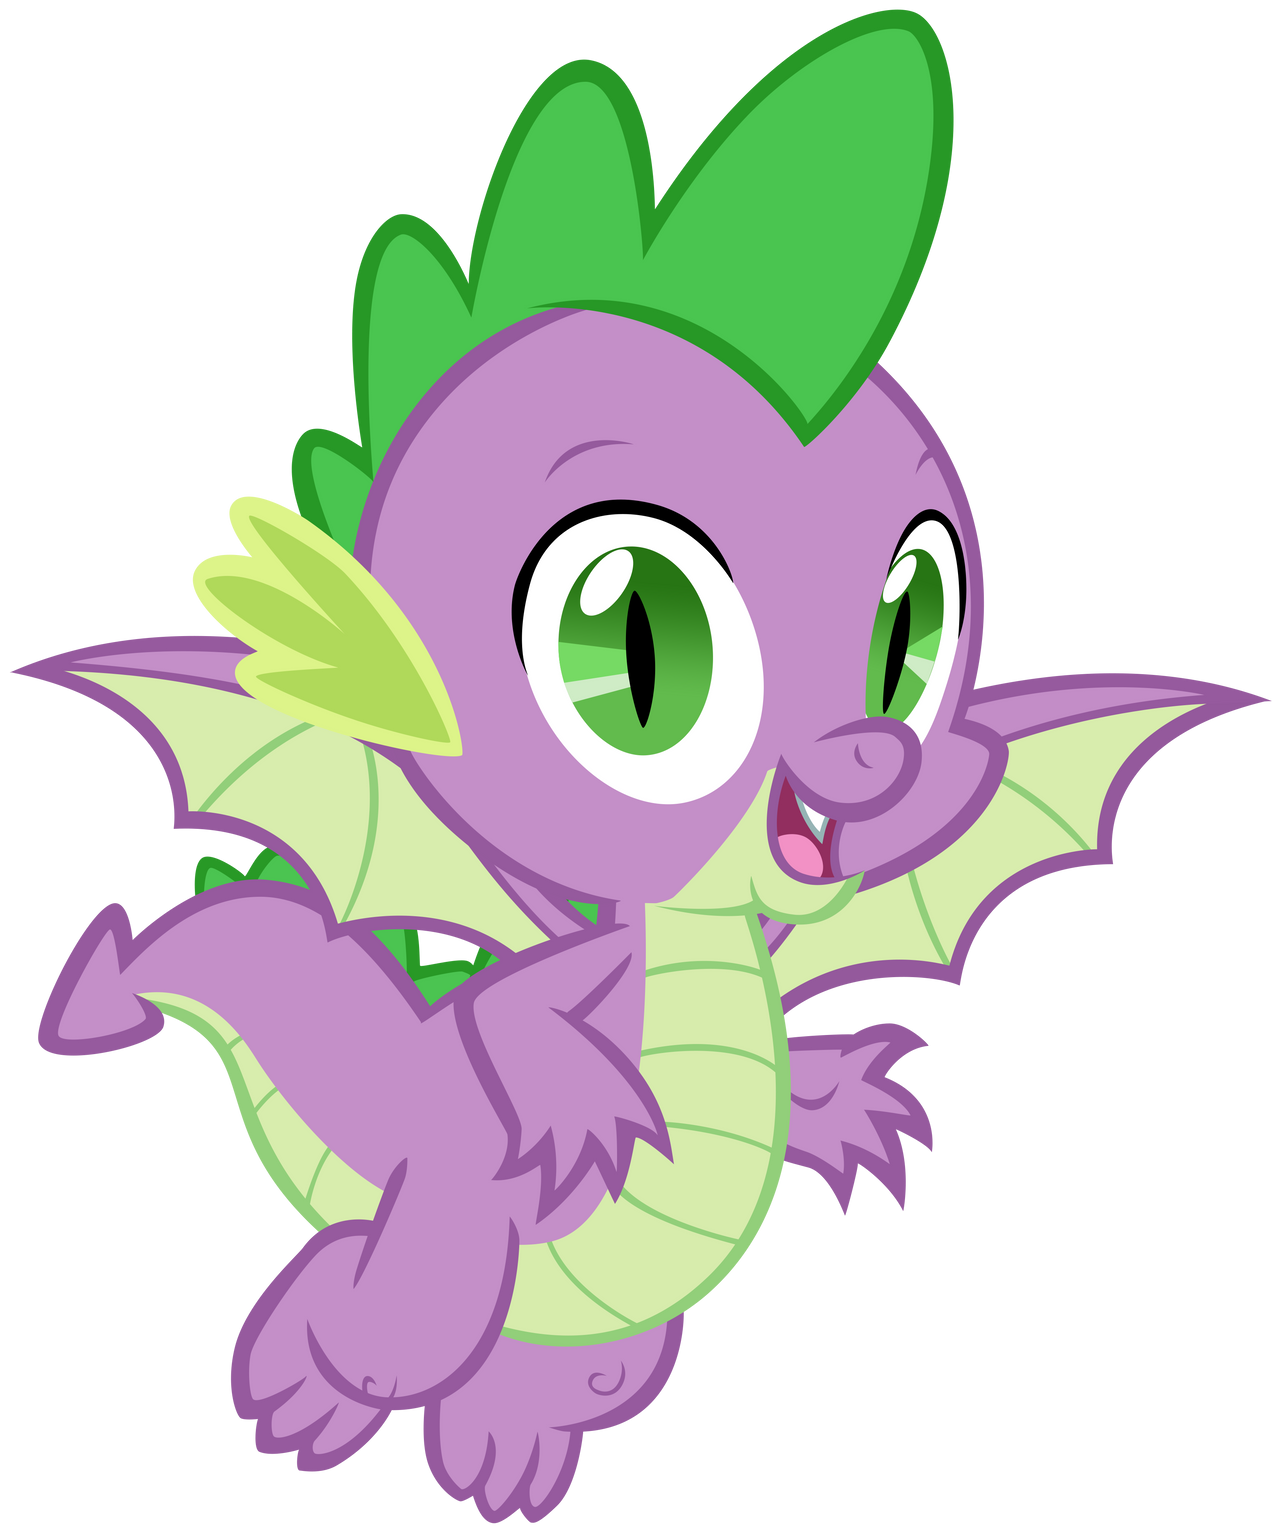 Spike Flying with his New Wings by AndoAnimalia on DeviantArt